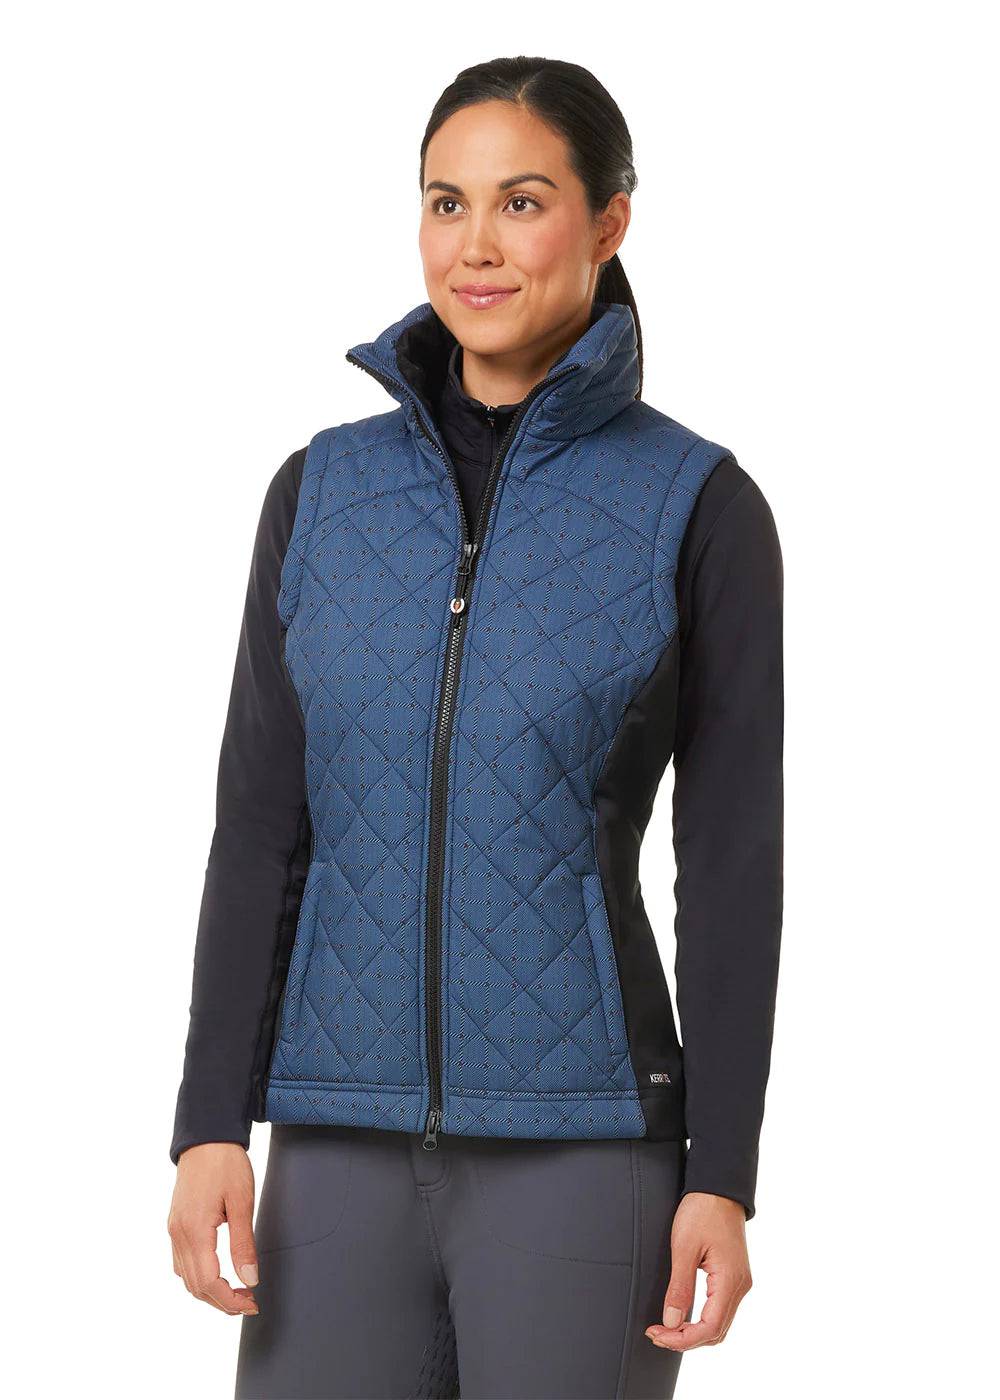 Kerrits Full Motion Quilted Riding Vest - CLEARANCE